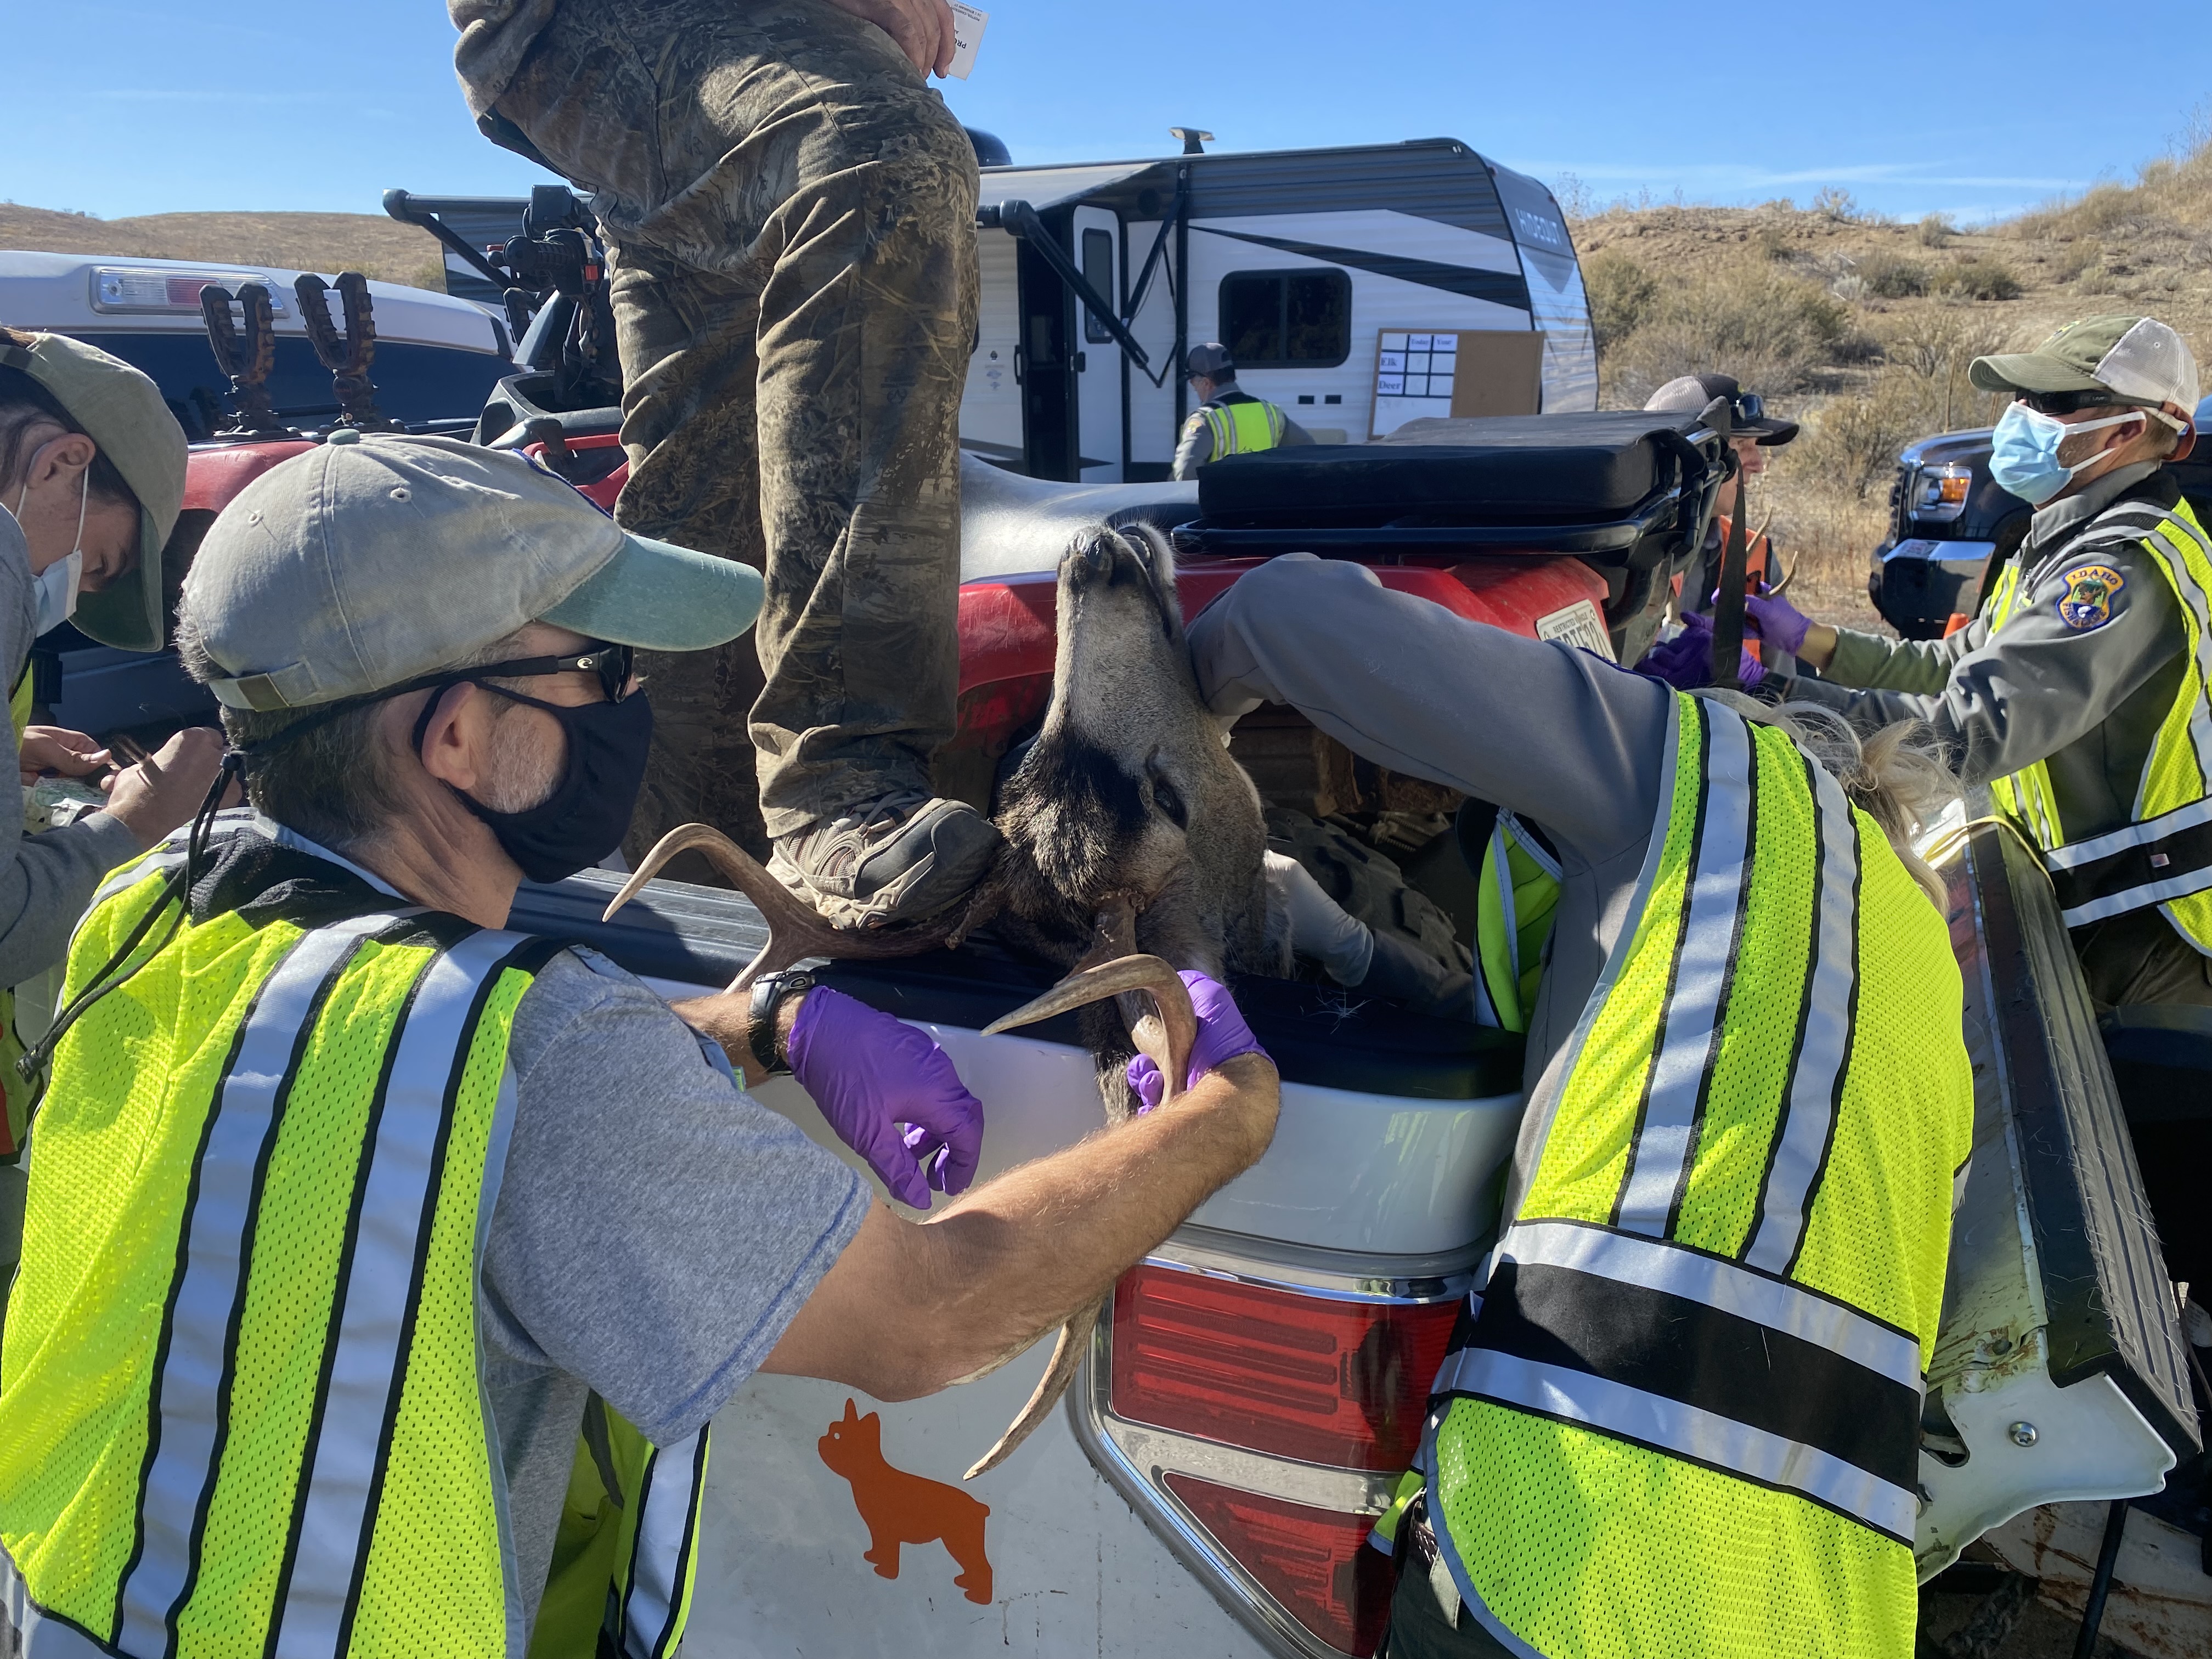 Idaho Fish and Game check station workers collect a lymph node sample for CWD testing